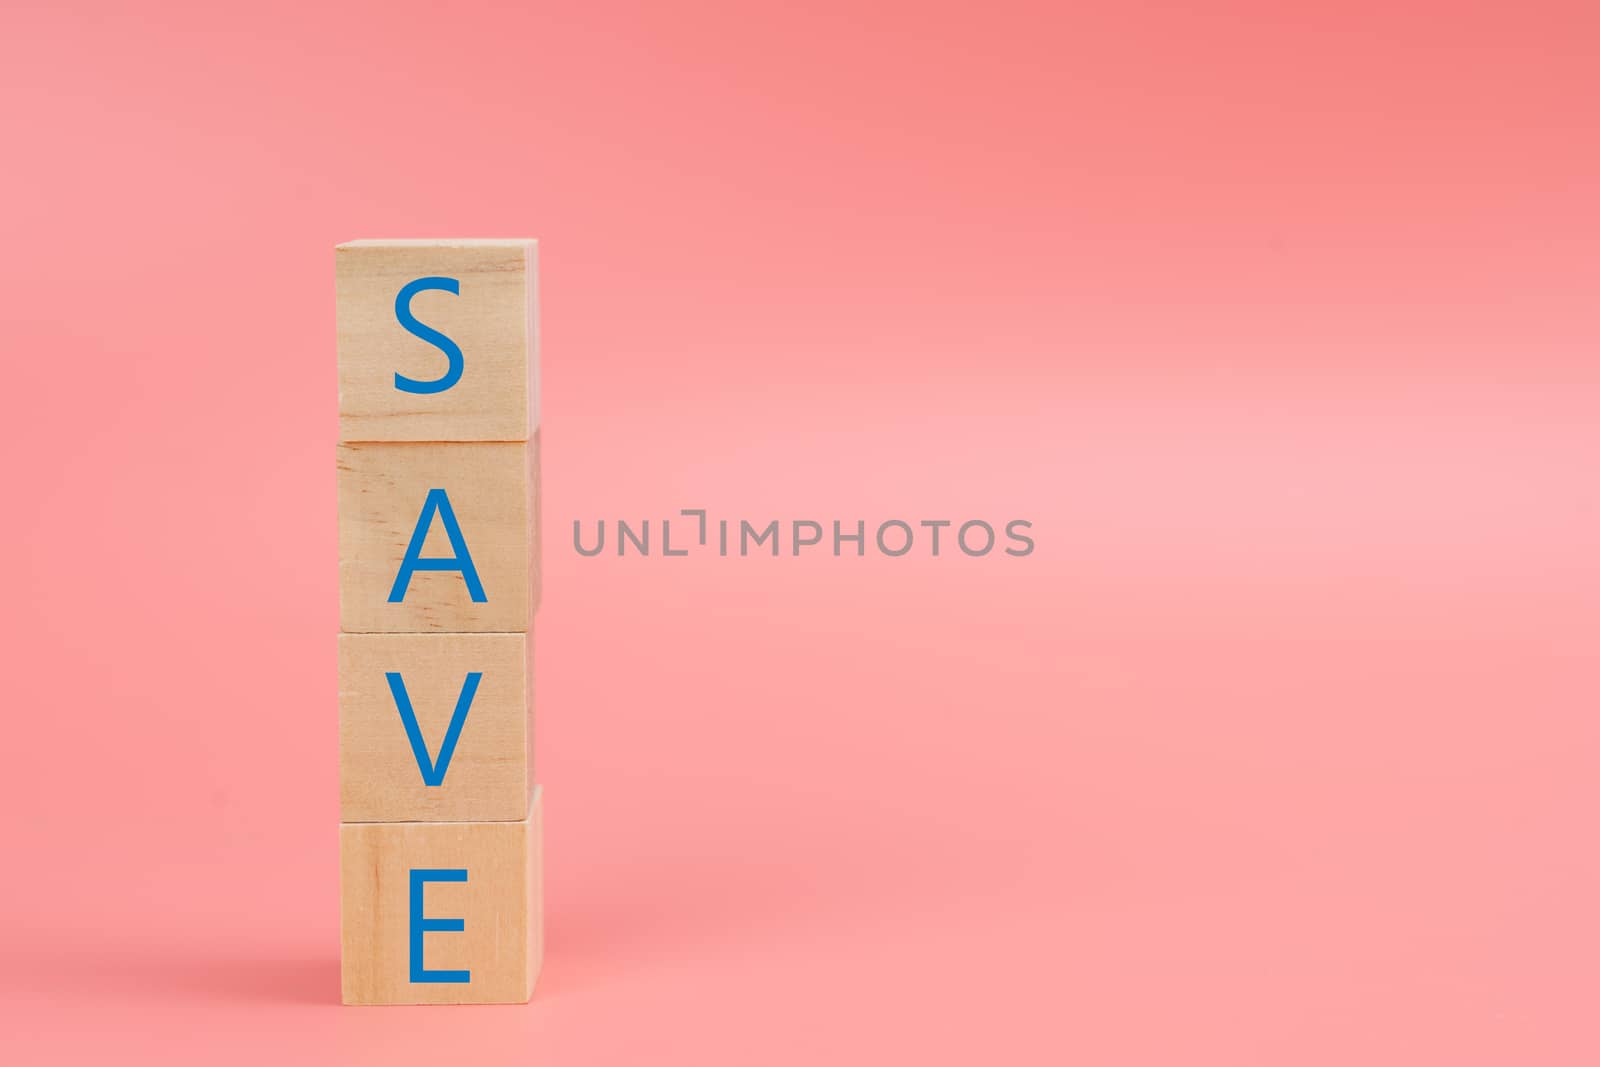 The word SAVE on the wood block on pink background